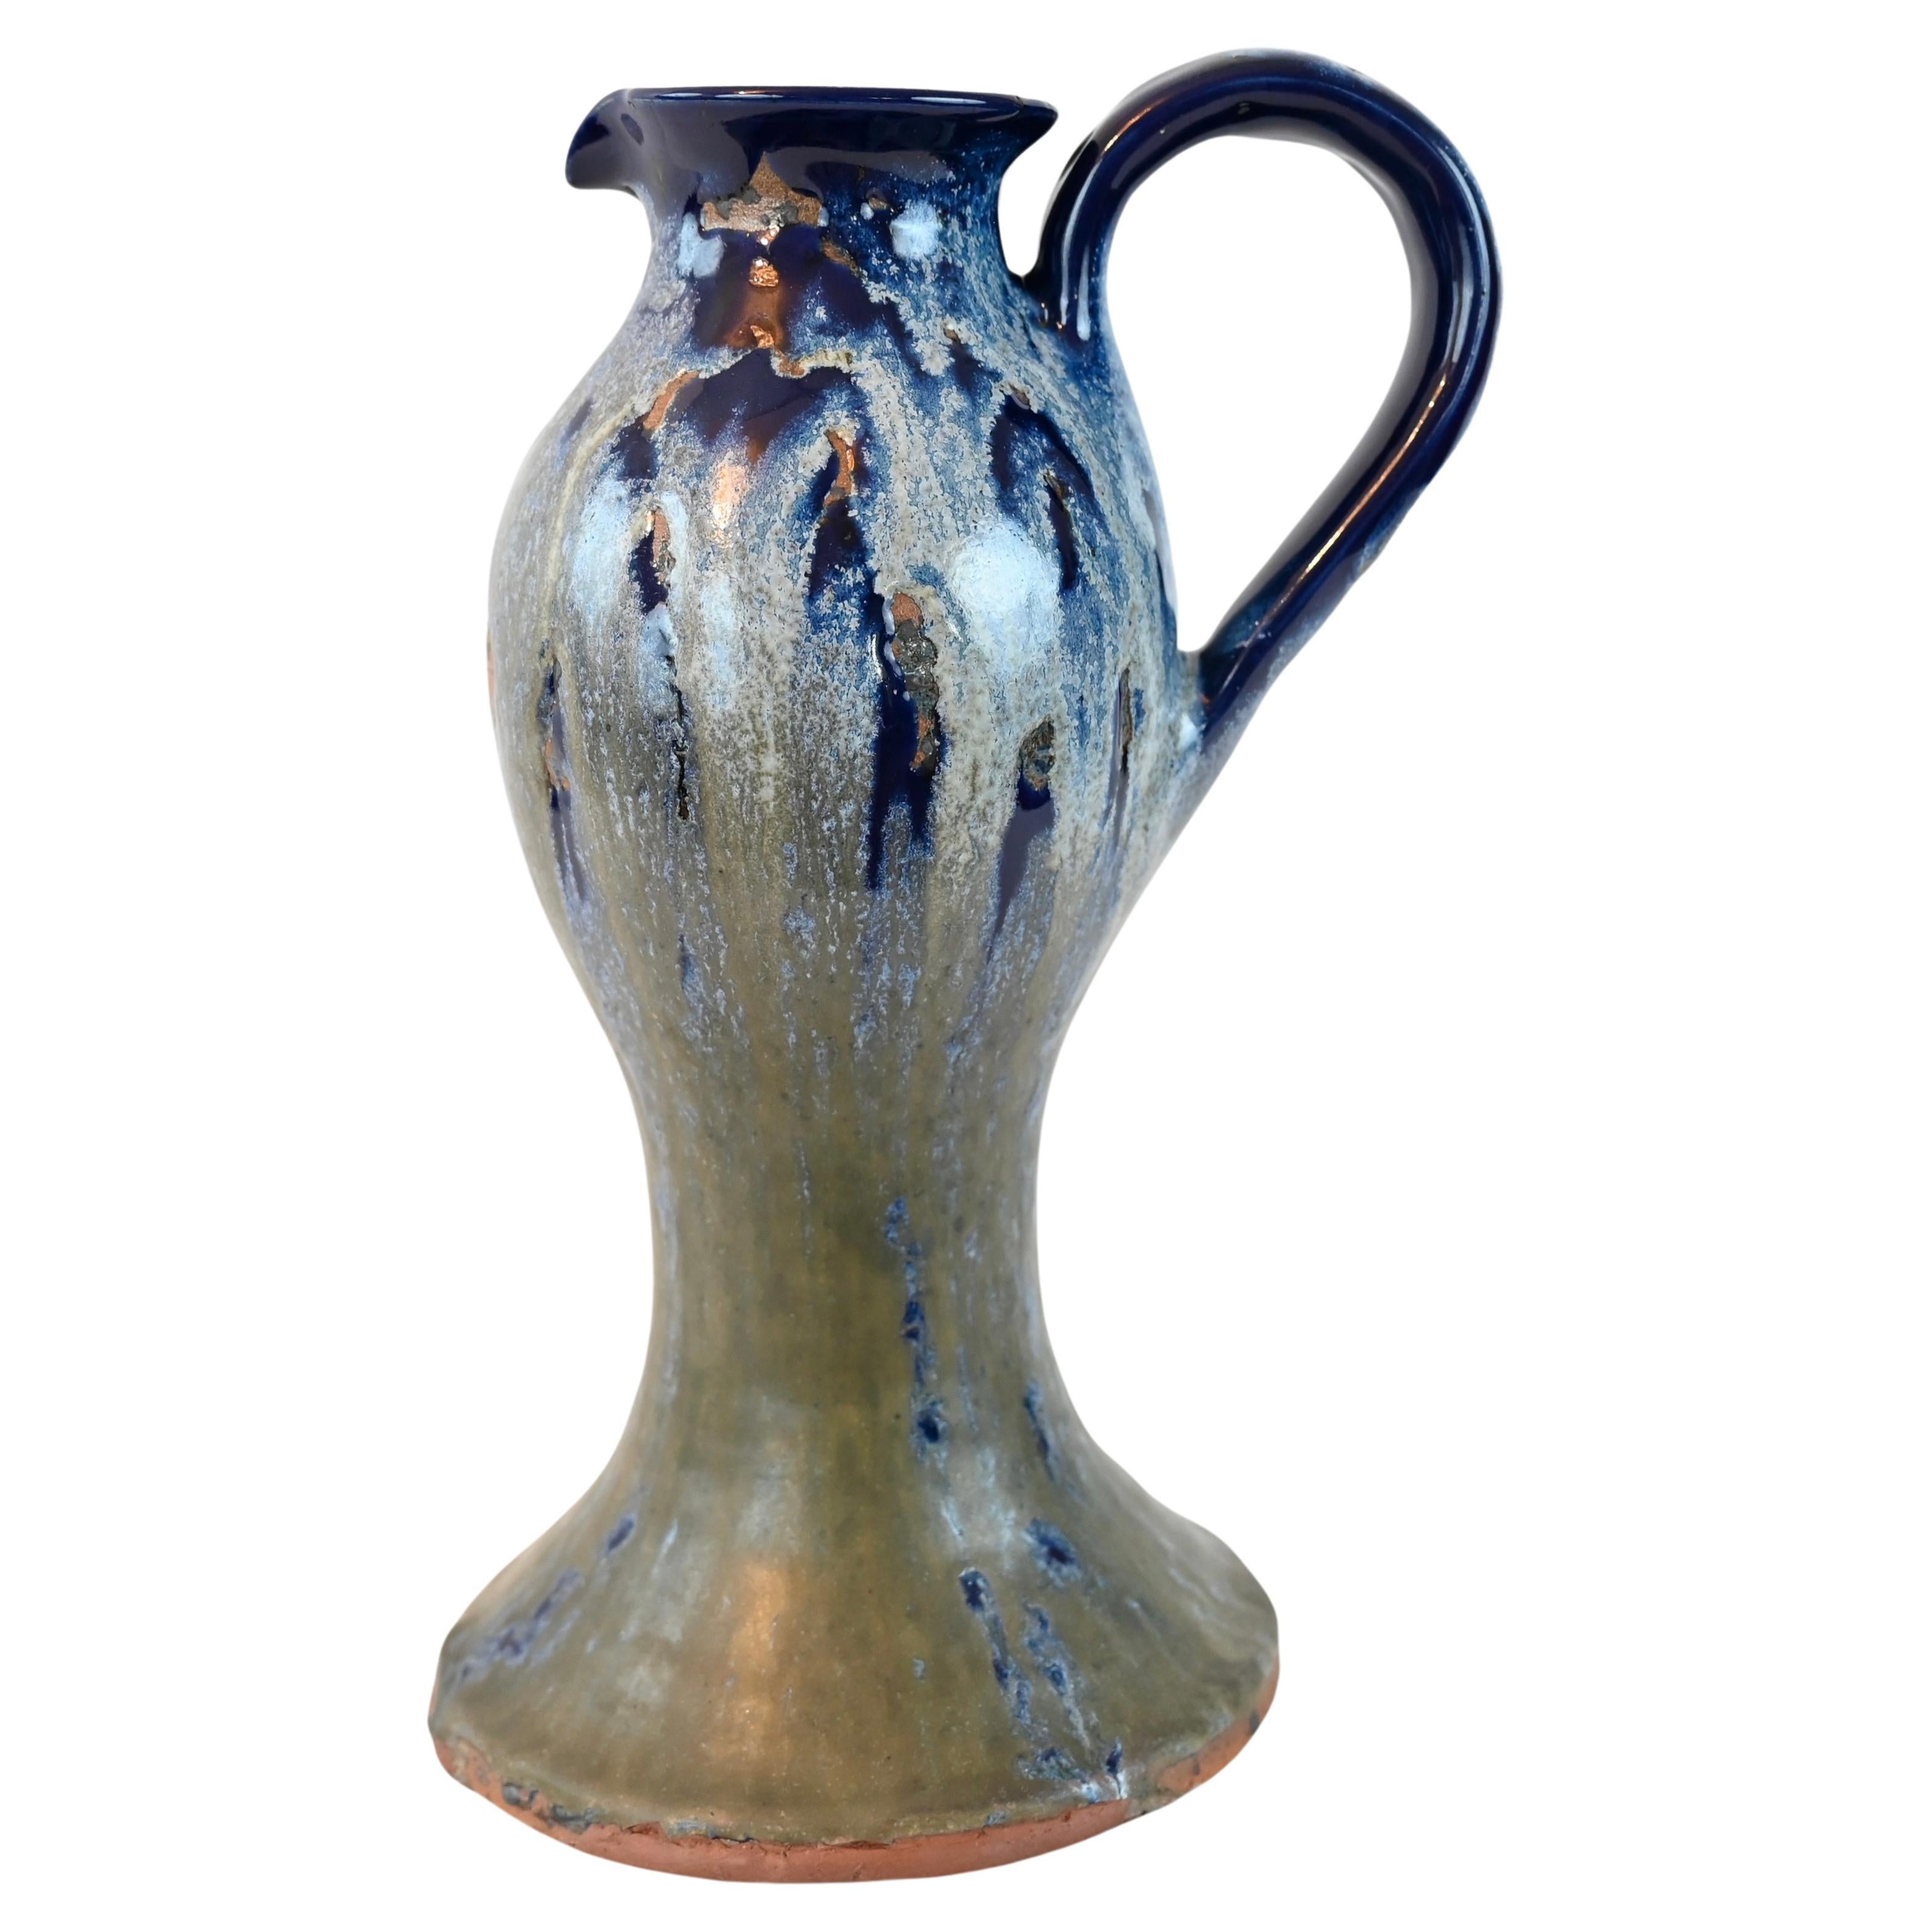 French Art Nouveau Ceramic Vase in a Pitcher Form Attrib. to Charles Gerber For Sale